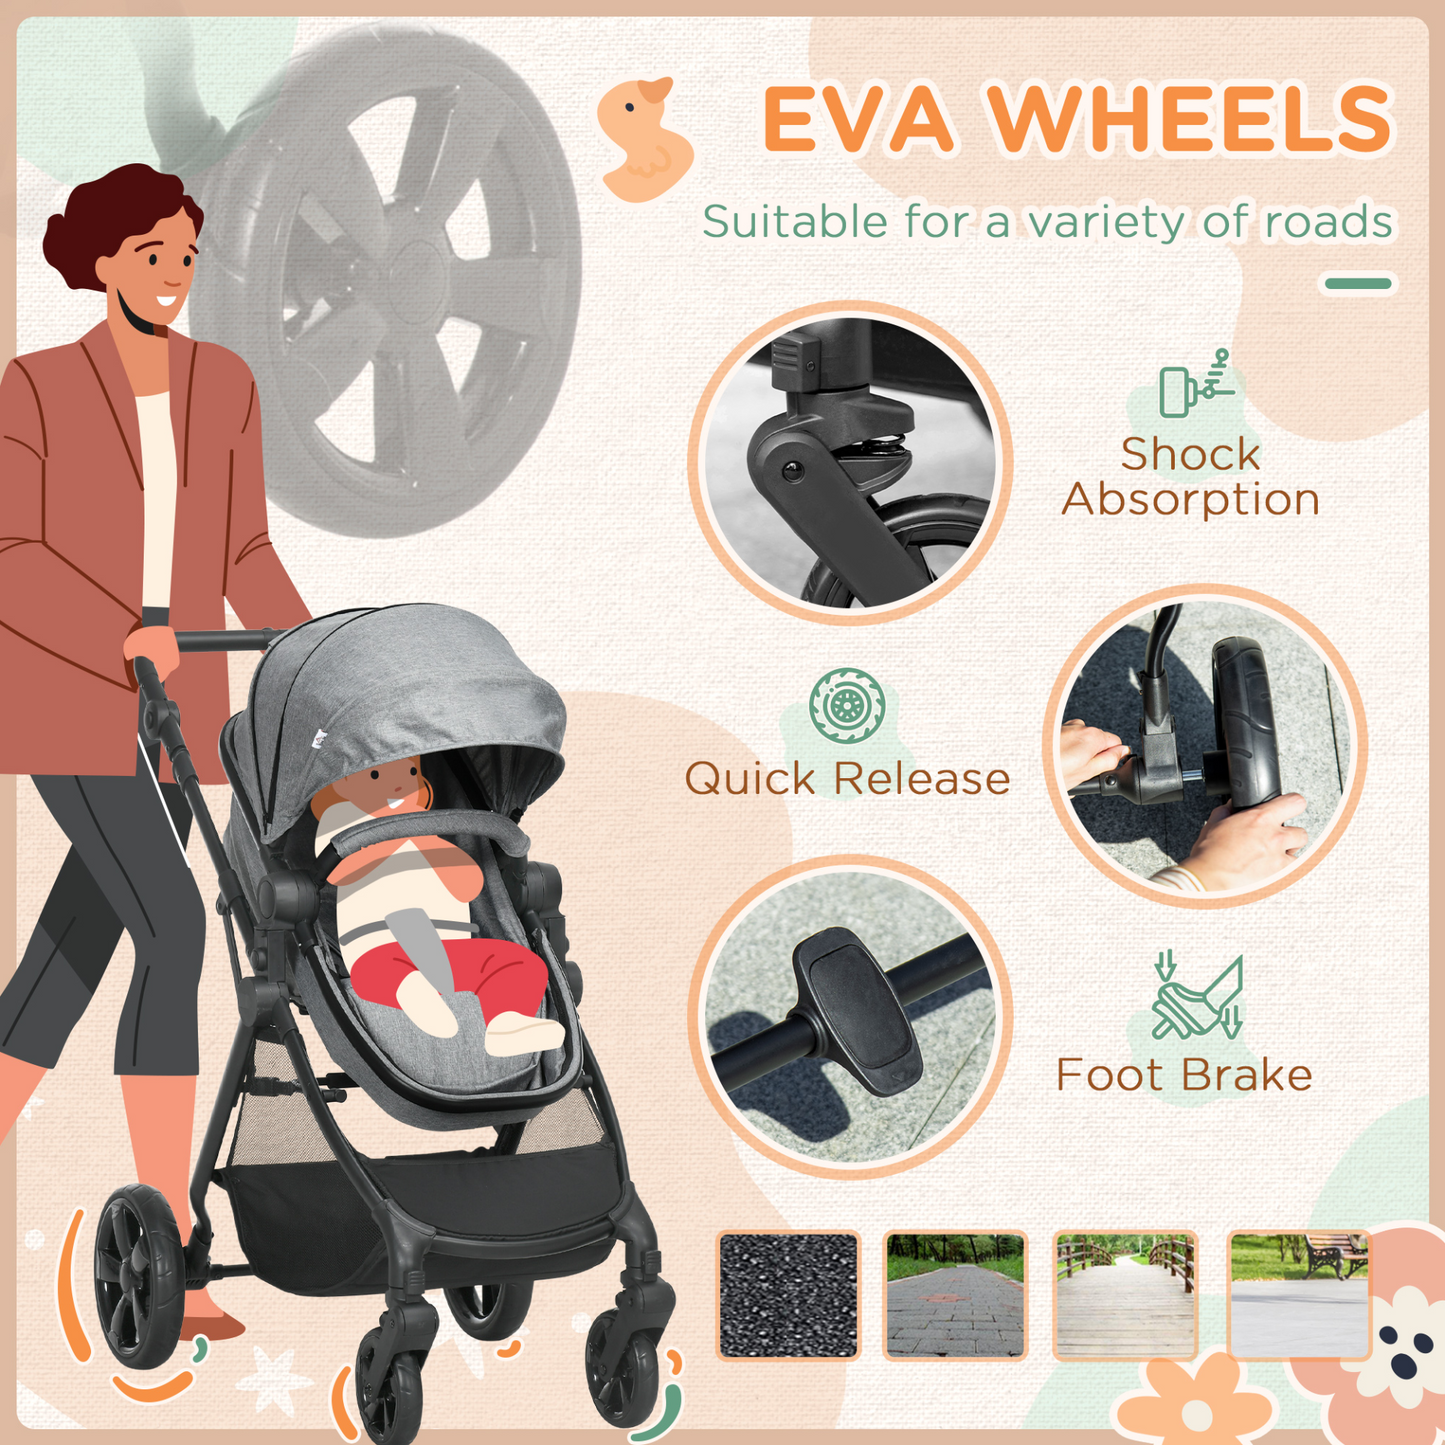 This stroller offers versatility as it can function as both a seat and a sleeping basket